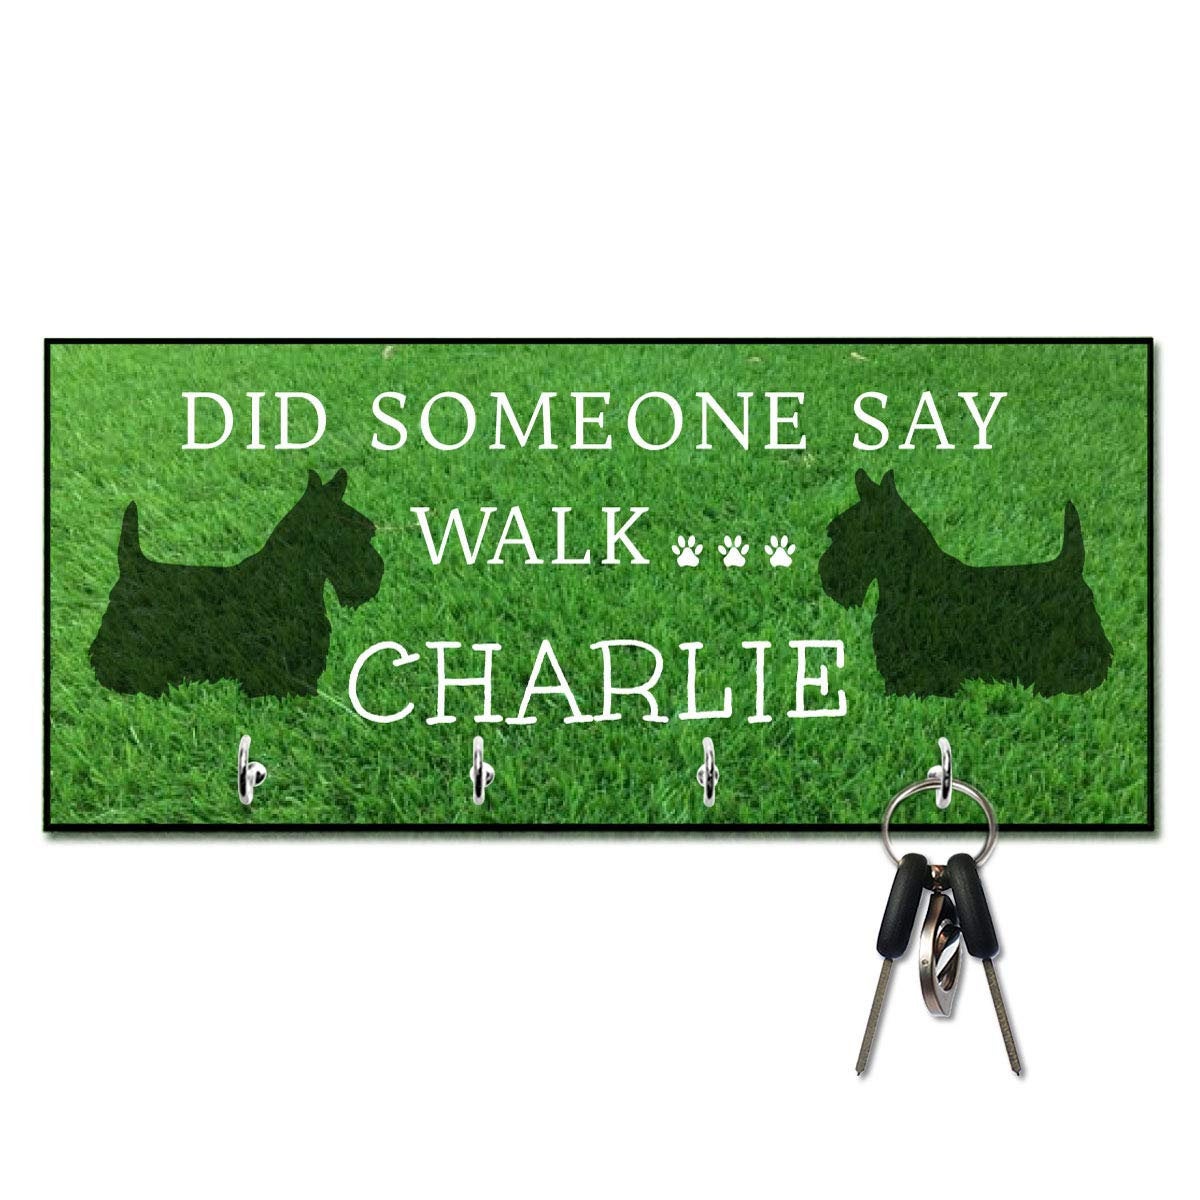 Pesonalized Did Someone Say Walk Scottish Terrier Dog Leash and Key Hanger